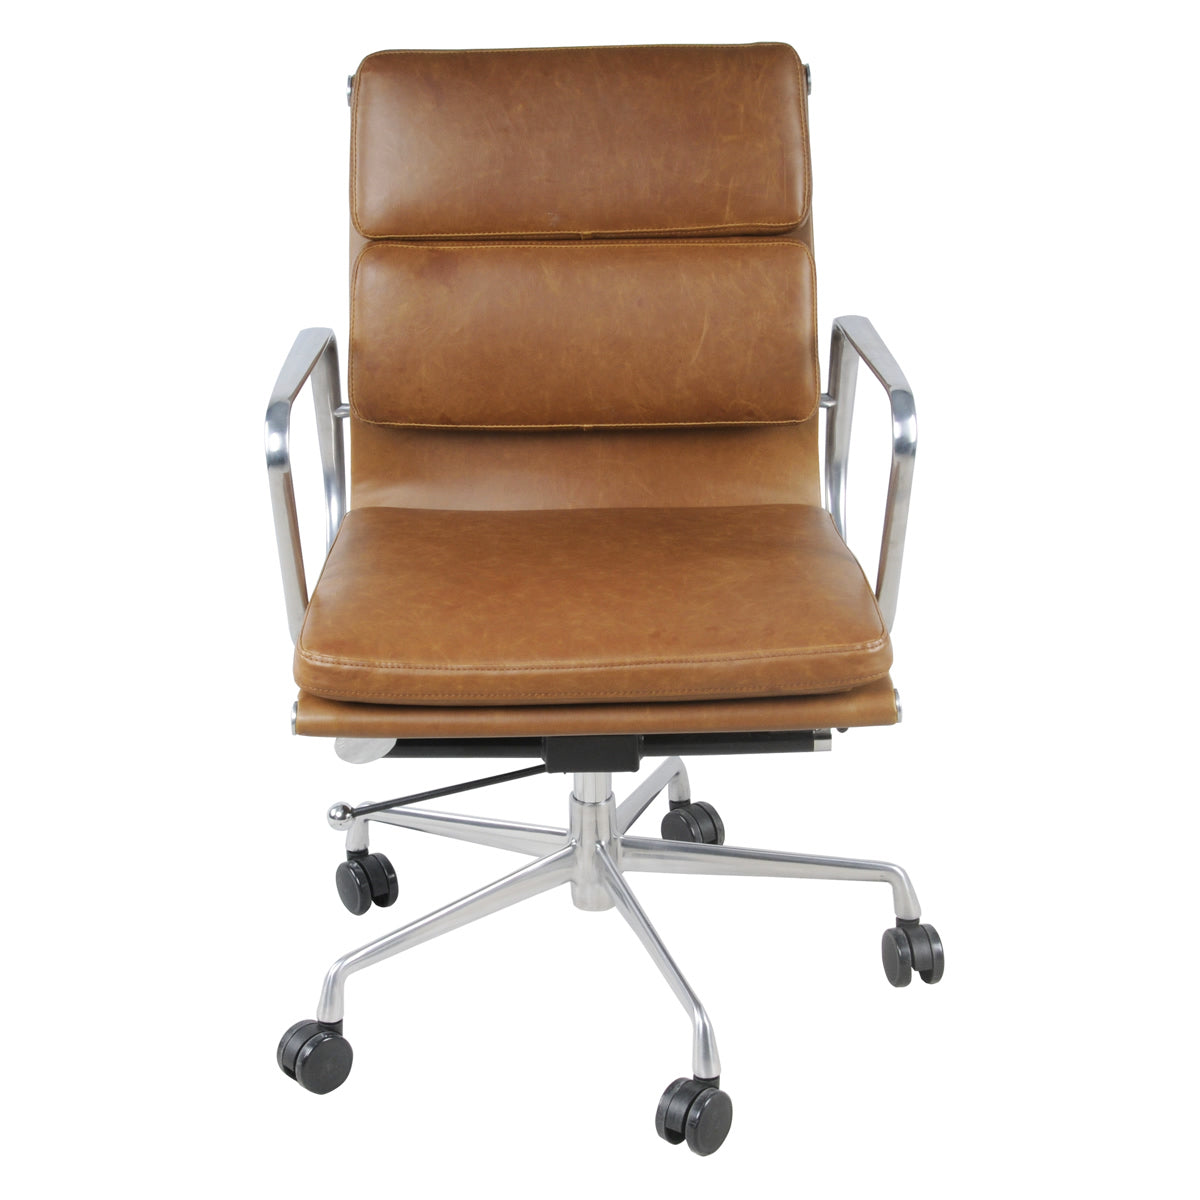 Chandel Low Back Office Chair by New Pacific Direct - 6900002